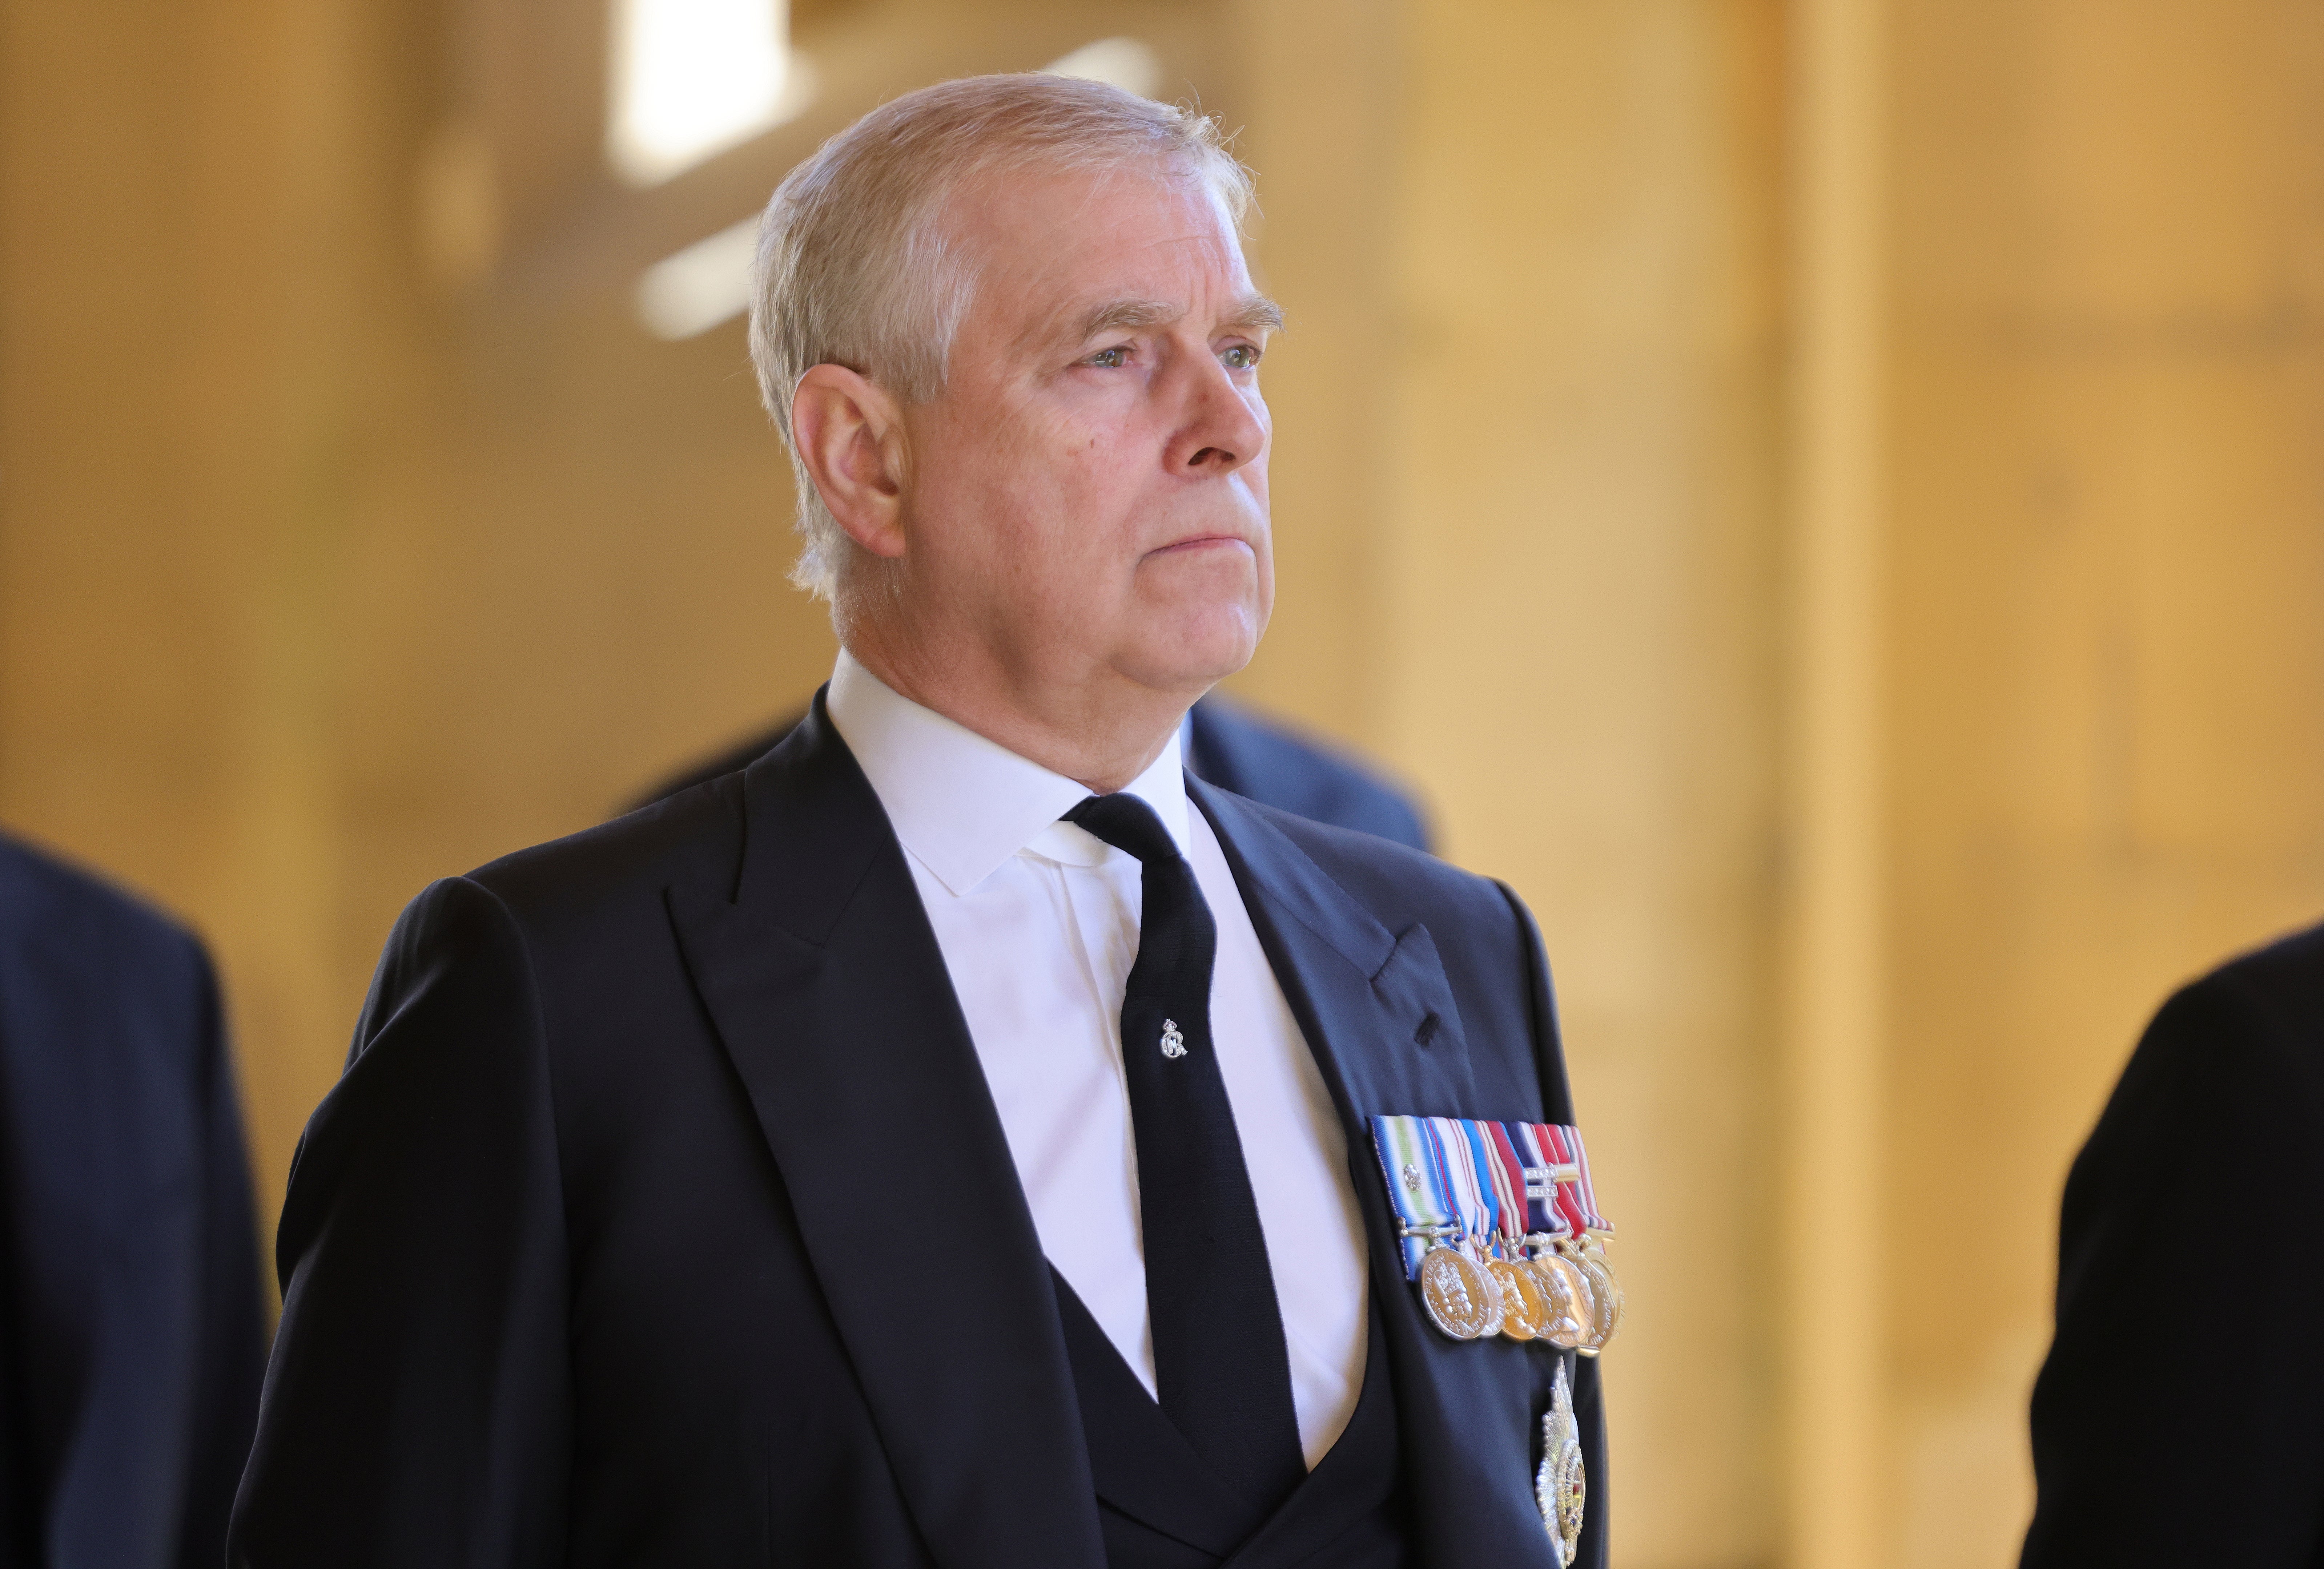 Andrew was given the Duke of York title on his wedding day